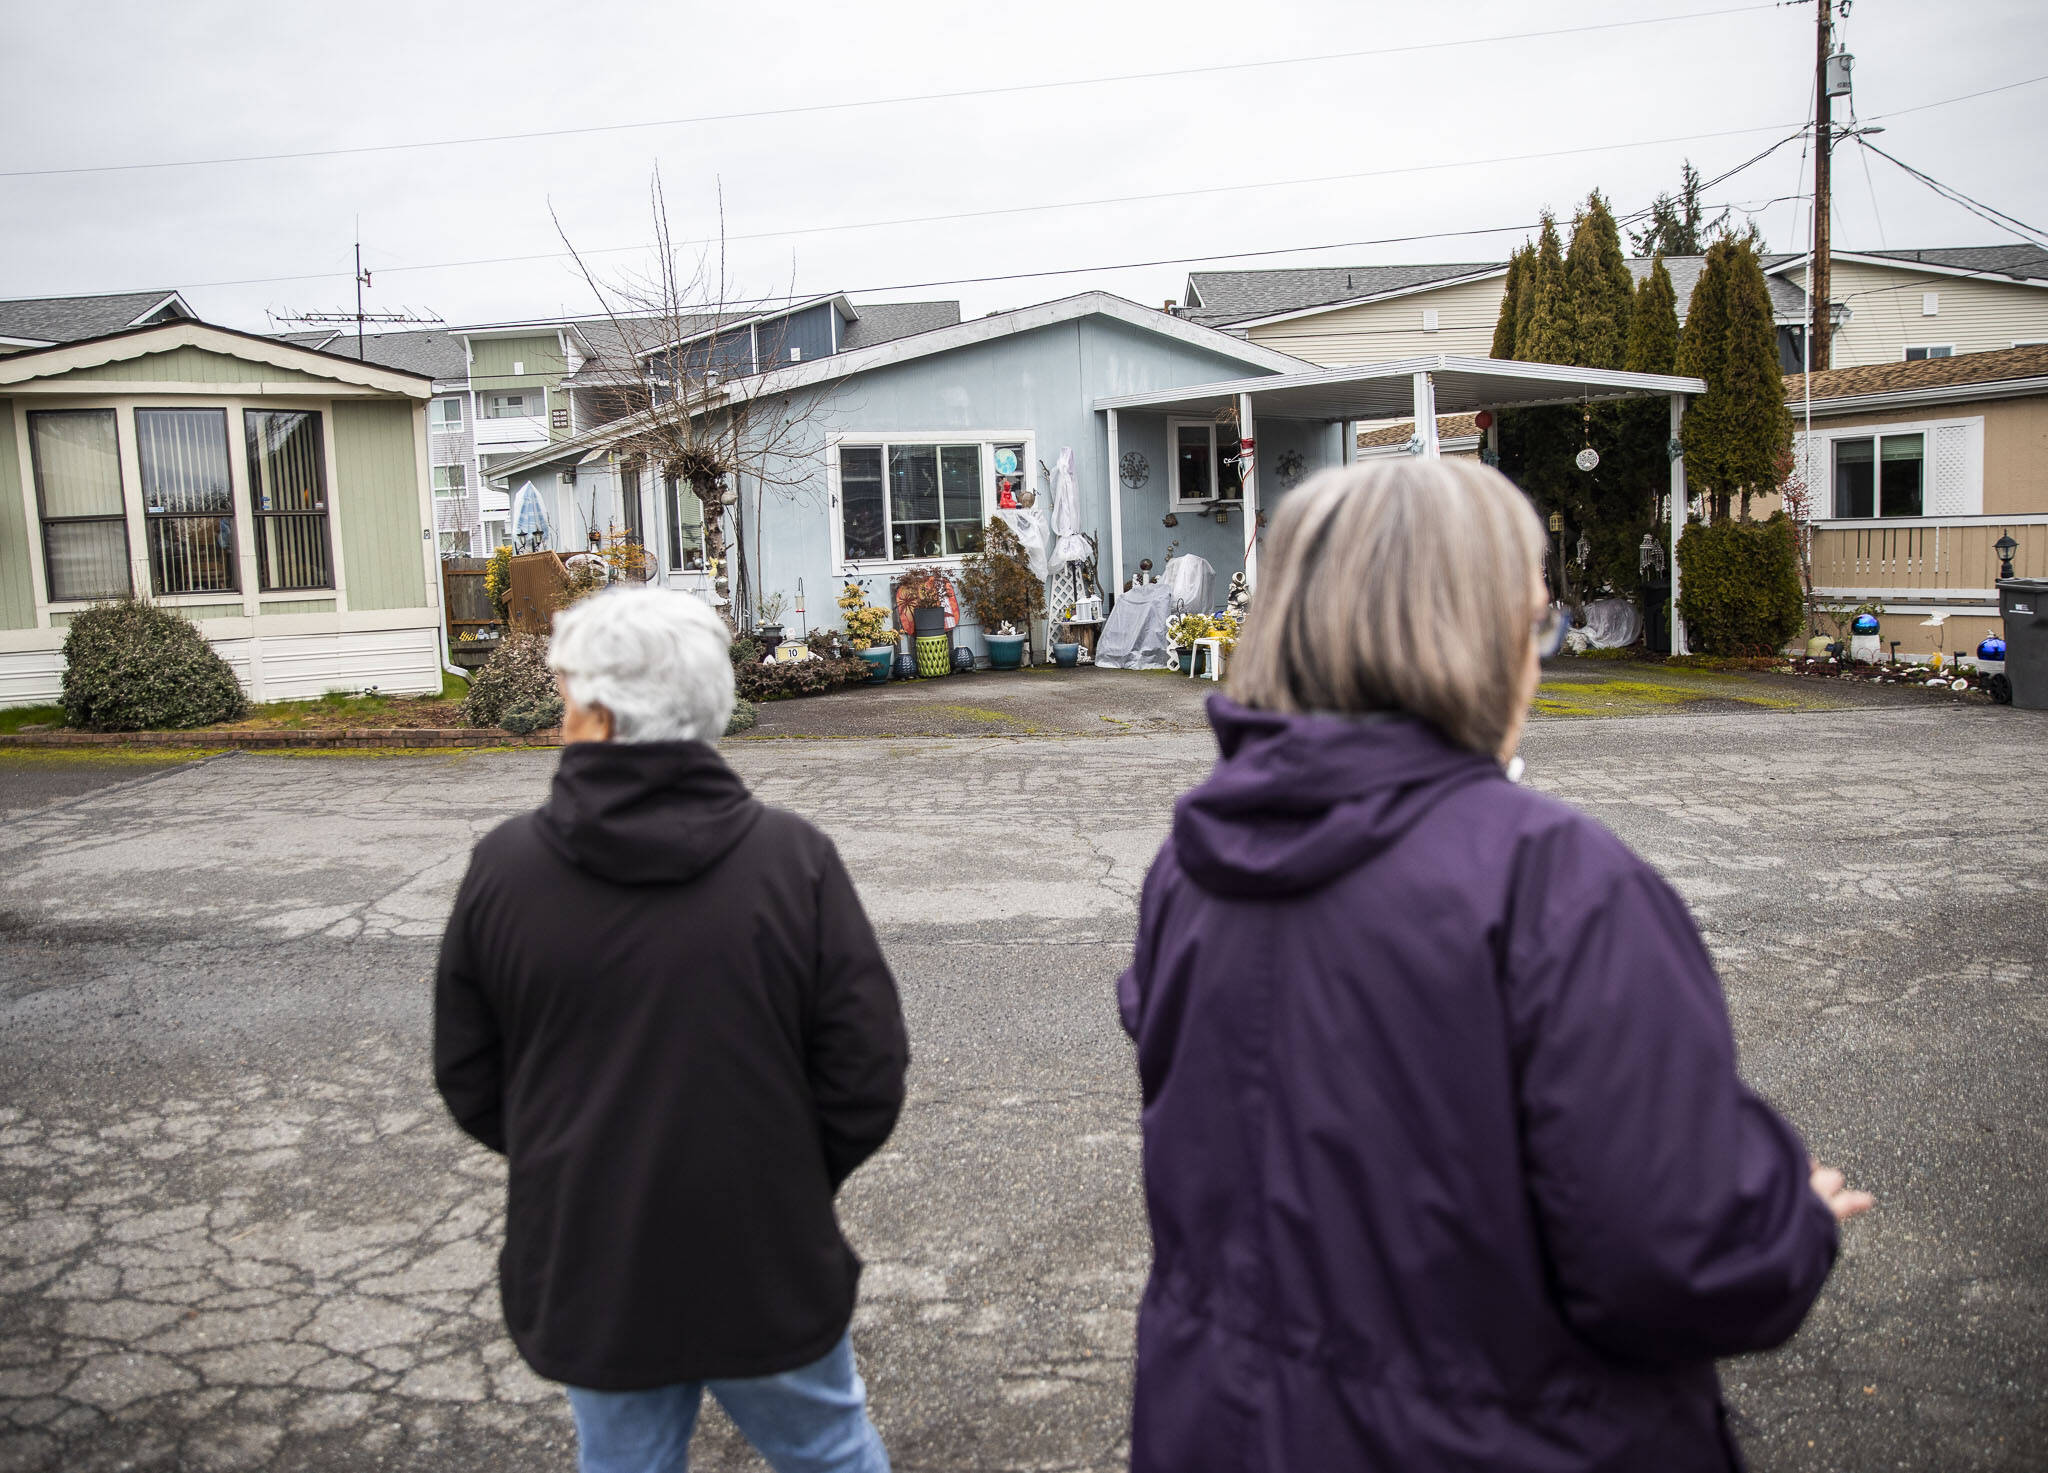 Royalwood Estates Mobile Home Park residents Patsy Gilbert, left, and Elna Olson, right, give a brief tour of the mobile home park on Monday, March 11, 2024 in Lynnwood, Washington. (Olivia Vanni / The Herald)